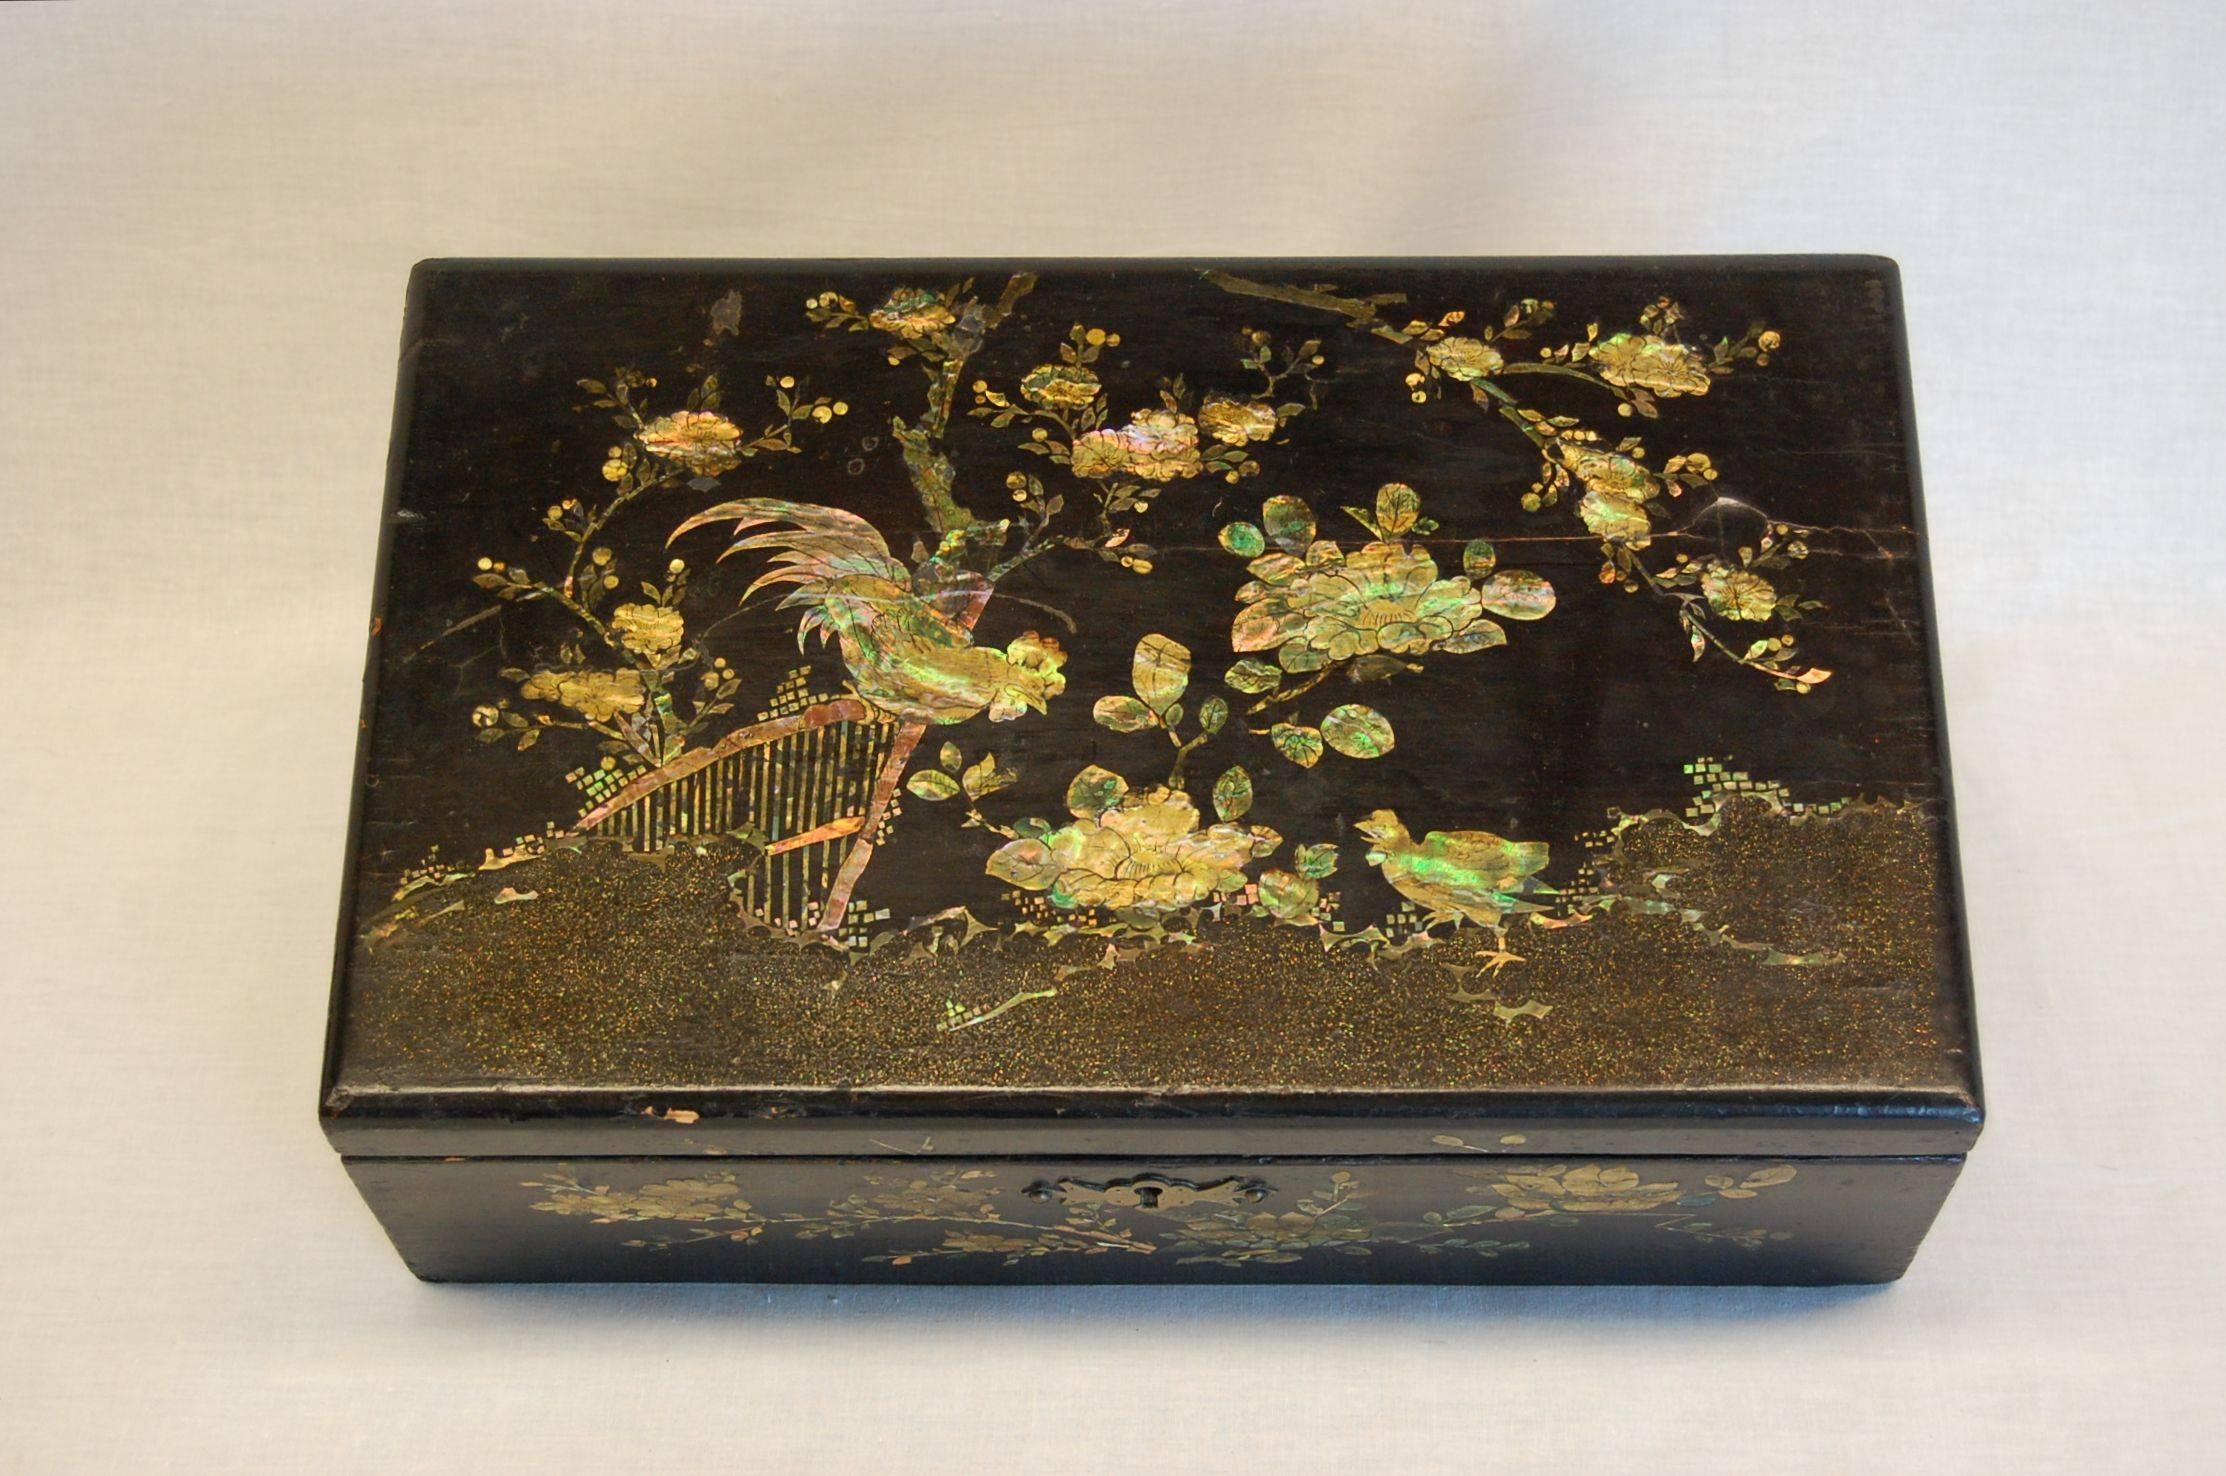 Very nice wooden box in black lacquered finish with original key which still operates the lock, circa 1850. Detailed mother-of-Pearl inlay of roosters and flowering trees. Interior lid and tray functions perfectly.